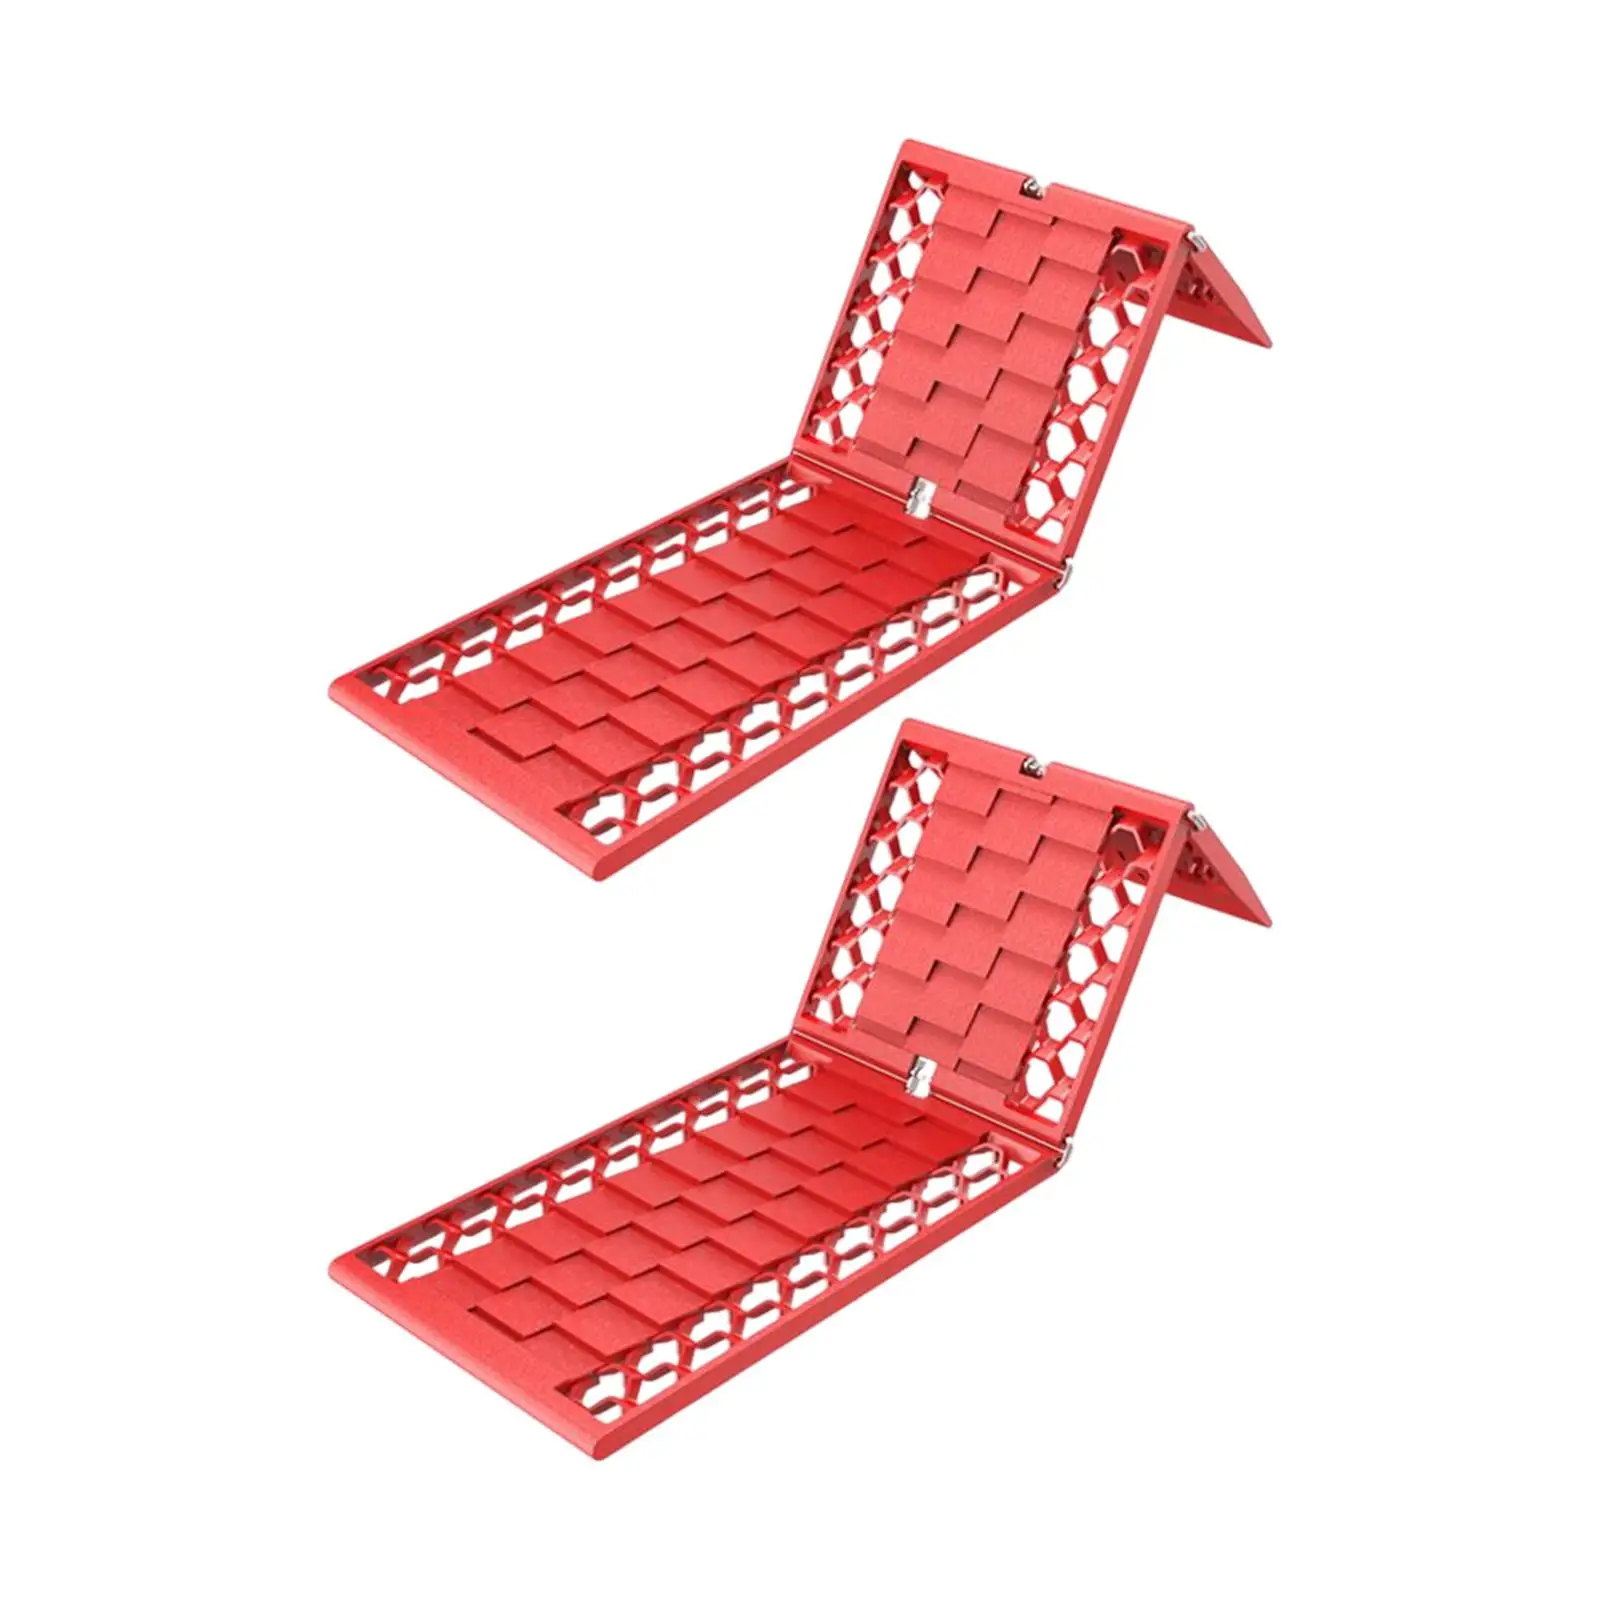 2 Pieces off roading traction track Snow Escape Devices for Vehicle Truck